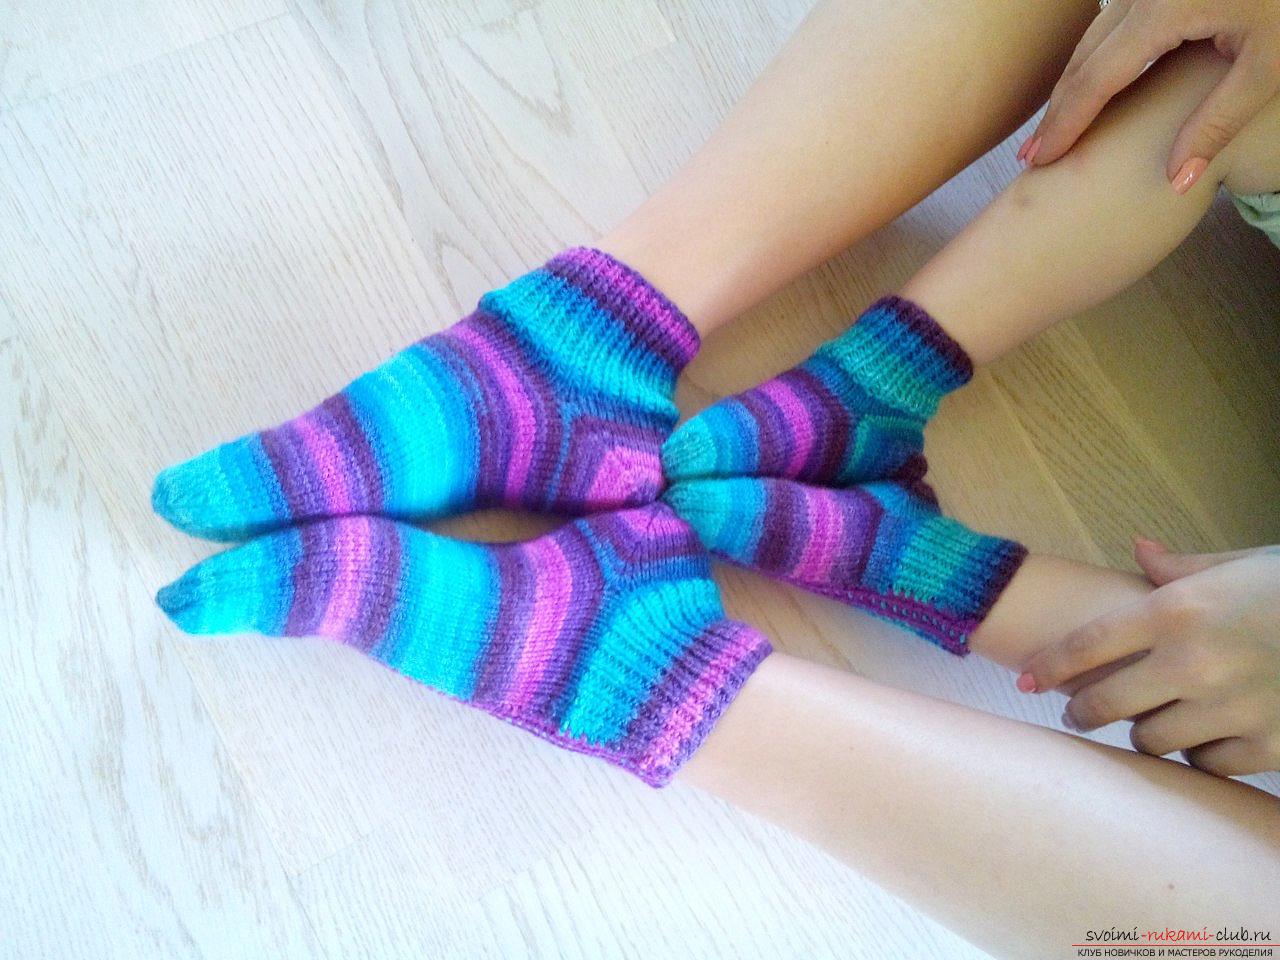 Beautiful socks for mom and daughter. Photo # 2